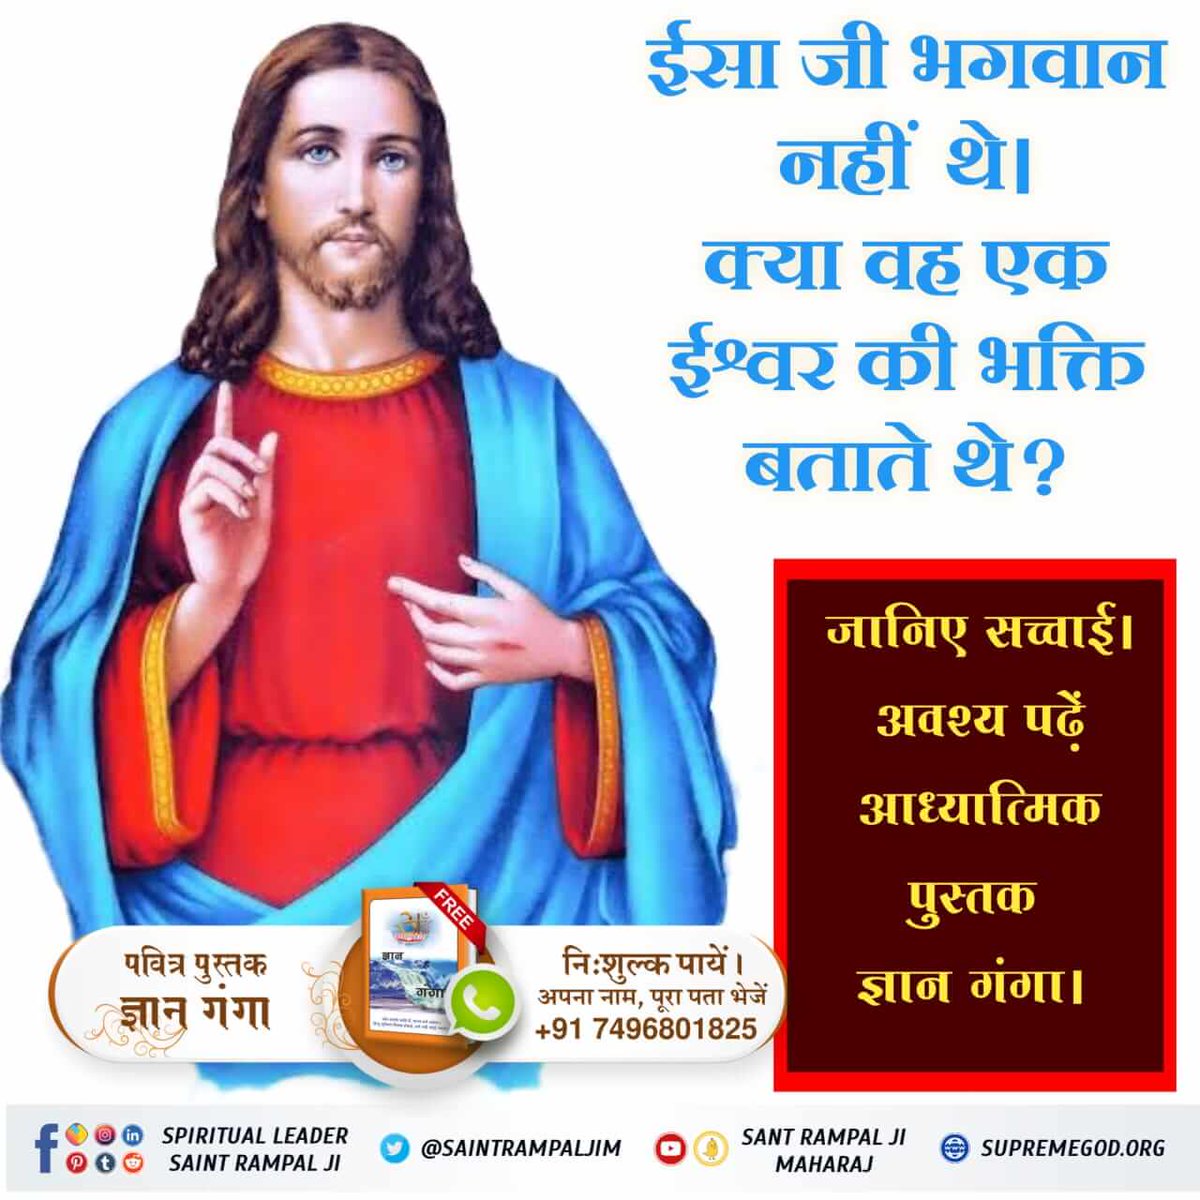 Holy Bible, Genesis 18:2
Abraham looked up and saw three men standing nearby. 
This proves that there are more than one God whereas Christians believe that God is One.
- Saint Rampal Ji Maharaj

#bibleart #holyspirit #christ #god #yeshua #hindibible #yeshumasih